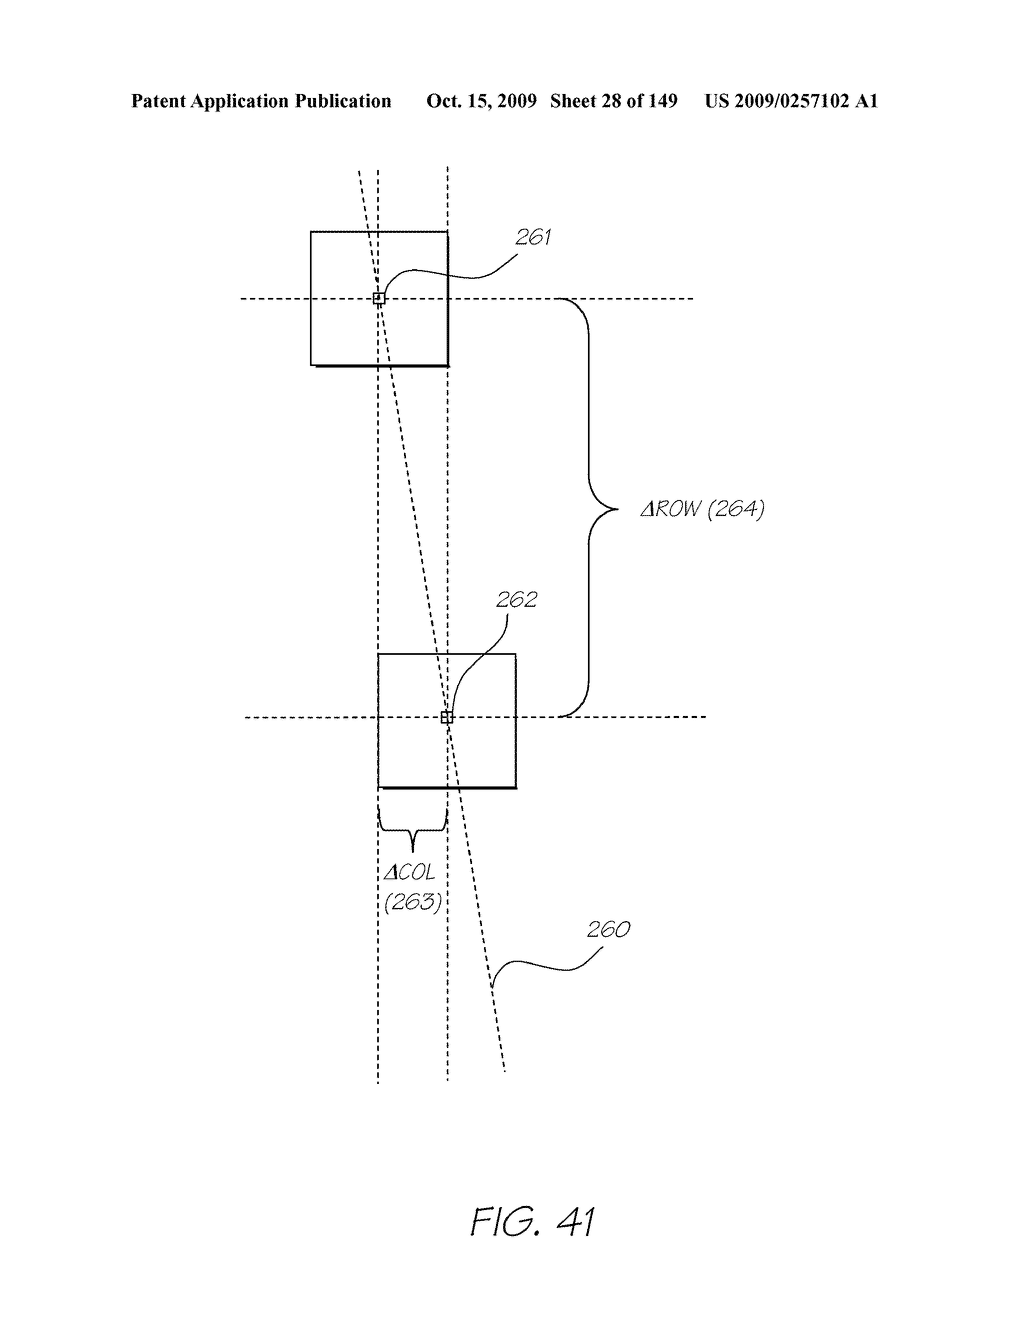 IMAGE PROCESSING APPARATUS HAVING CARD READER FOR APPLYING EFFECTS STORED ON A CARD TO A STORED IMAGE - diagram, schematic, and image 29